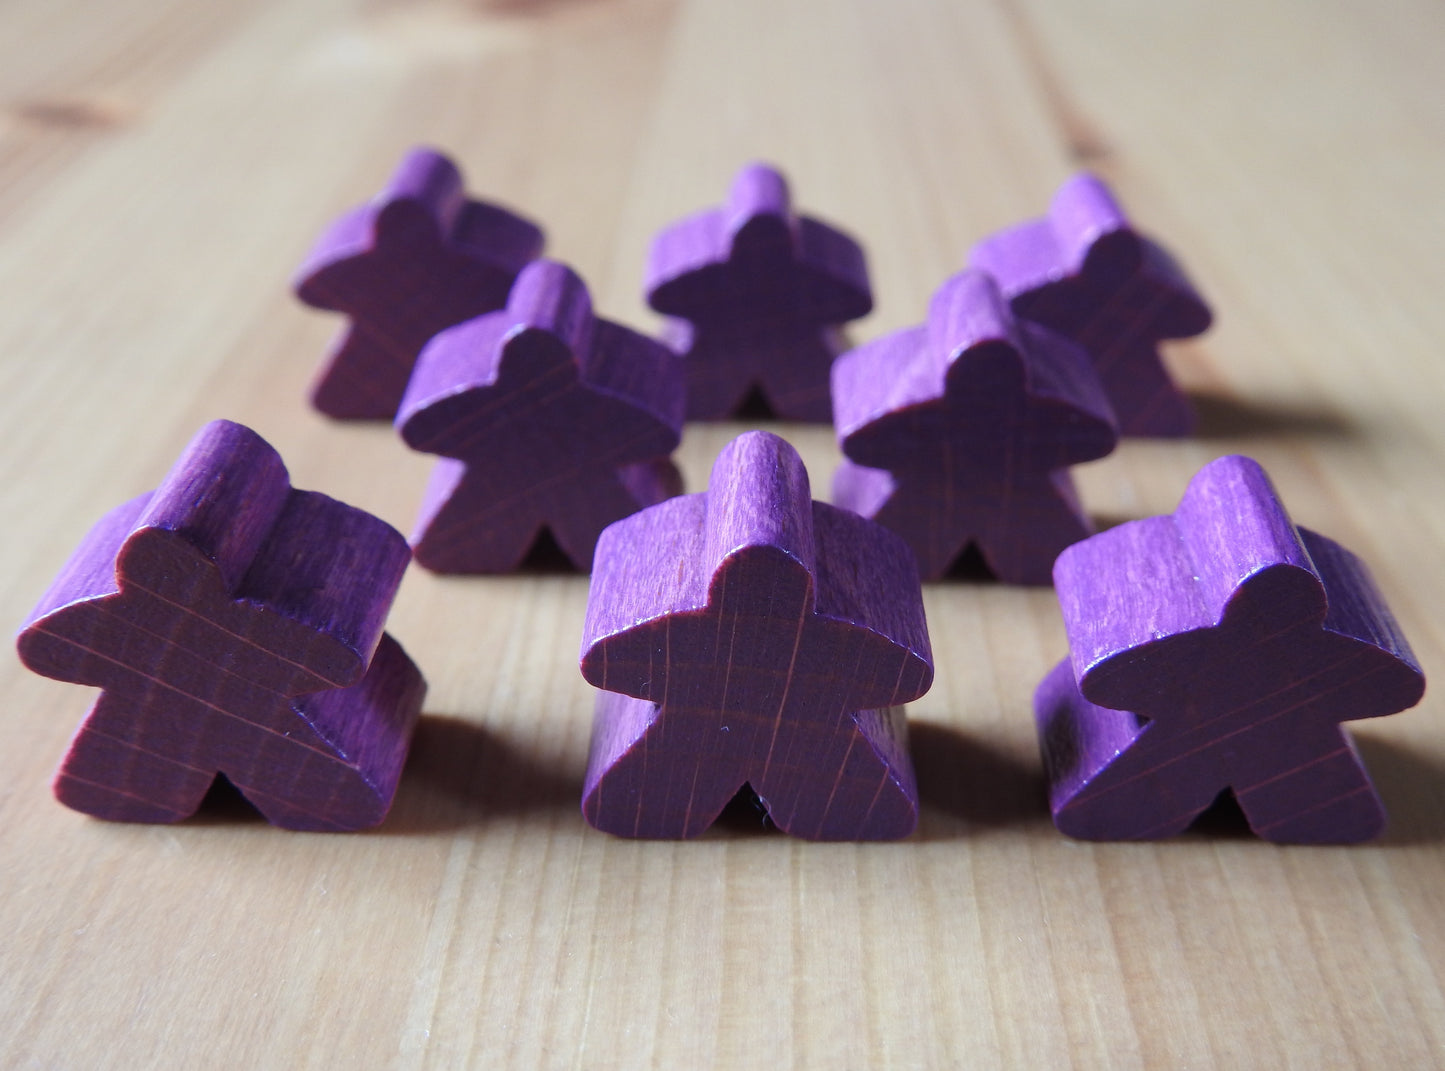 Close-up view of the purple set of 8 meeples.